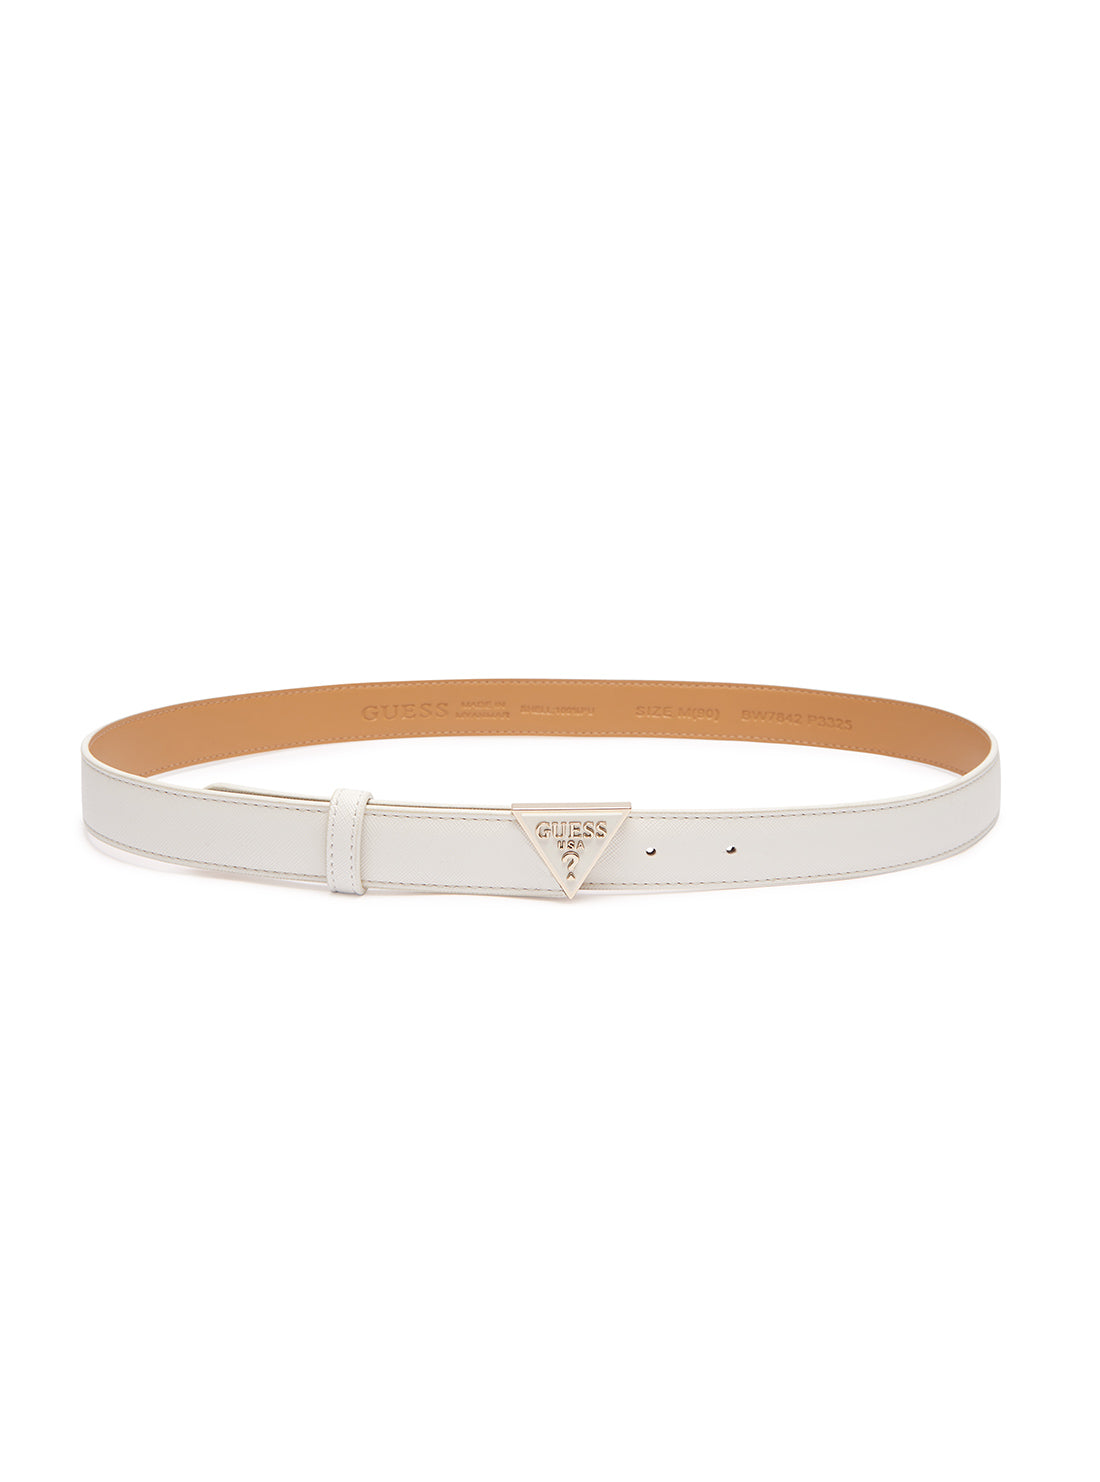 GUESS White Triangle Logo Belt full view